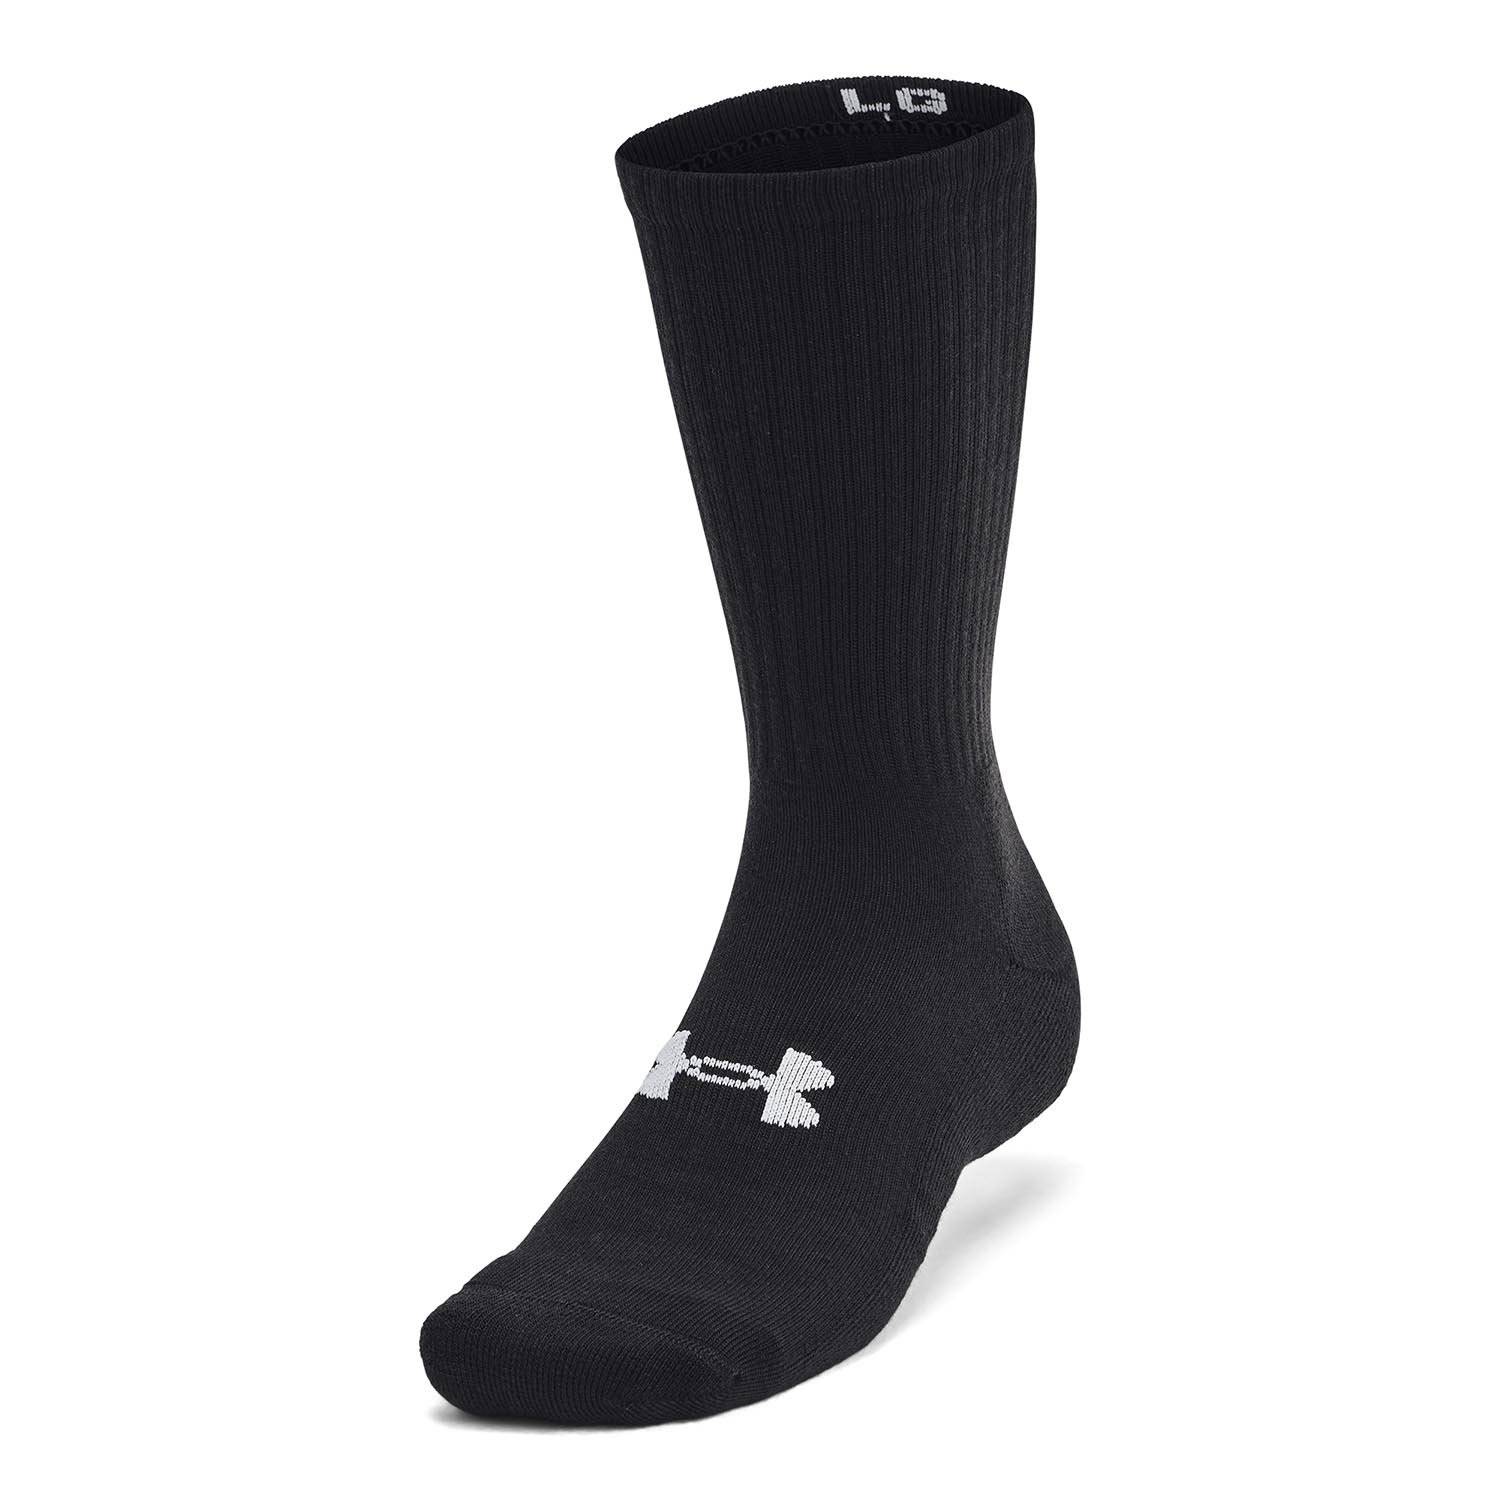 UNDER ARMOUR TACTICAL BOOT SOCKS